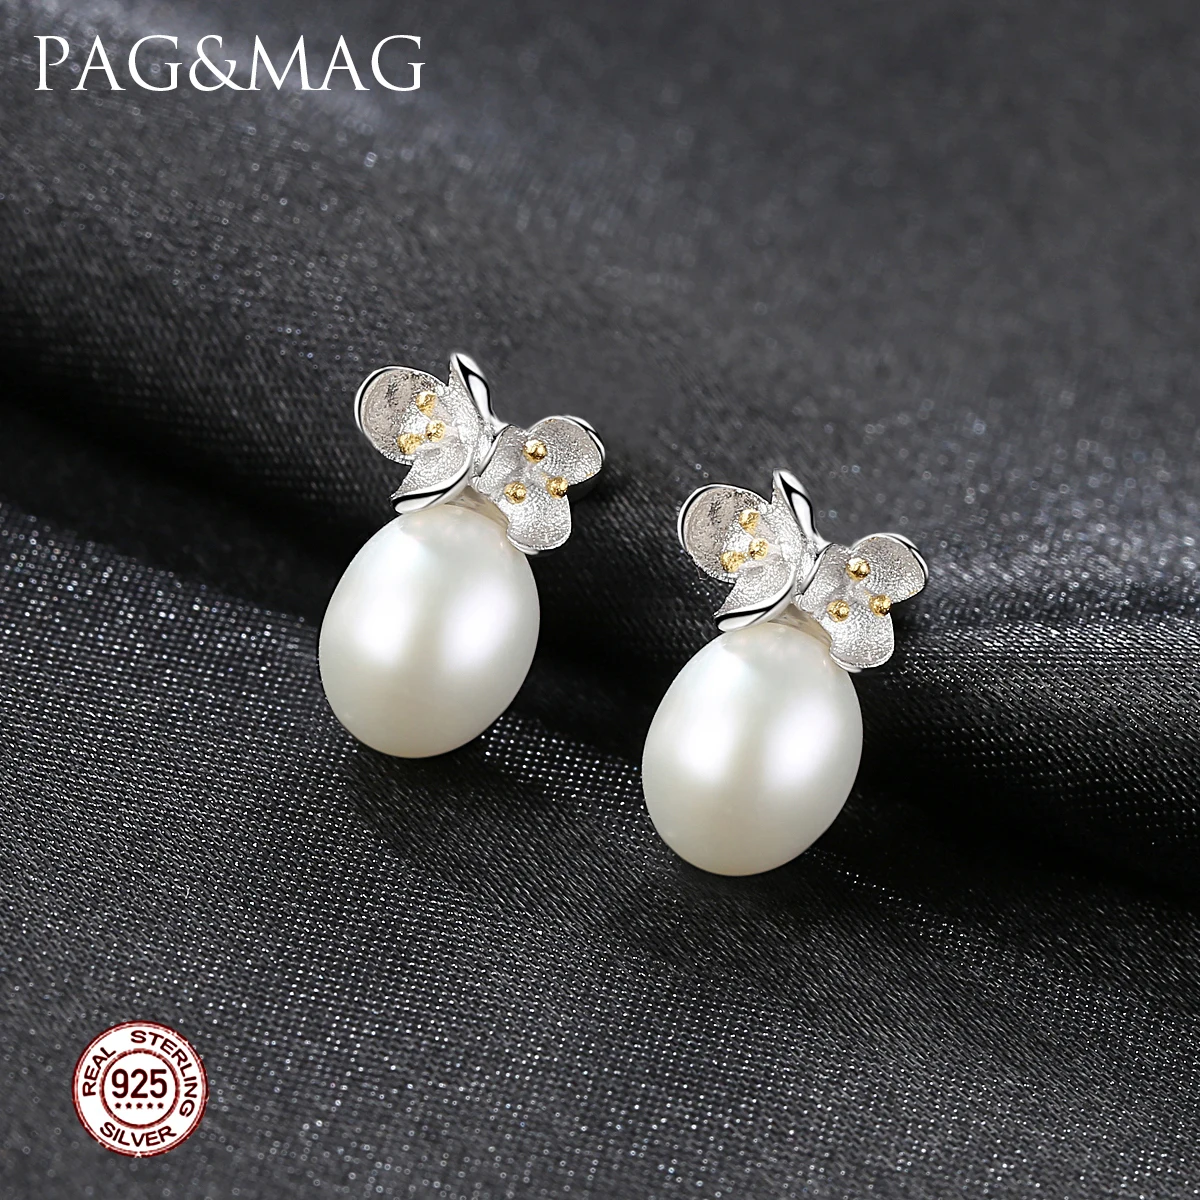 

PAG&MAG Wholesale S925 Sterling Silver Darling Flower Shape Stud Earring Freshwater Pearl Earring For Girl Valentine's Day Gift